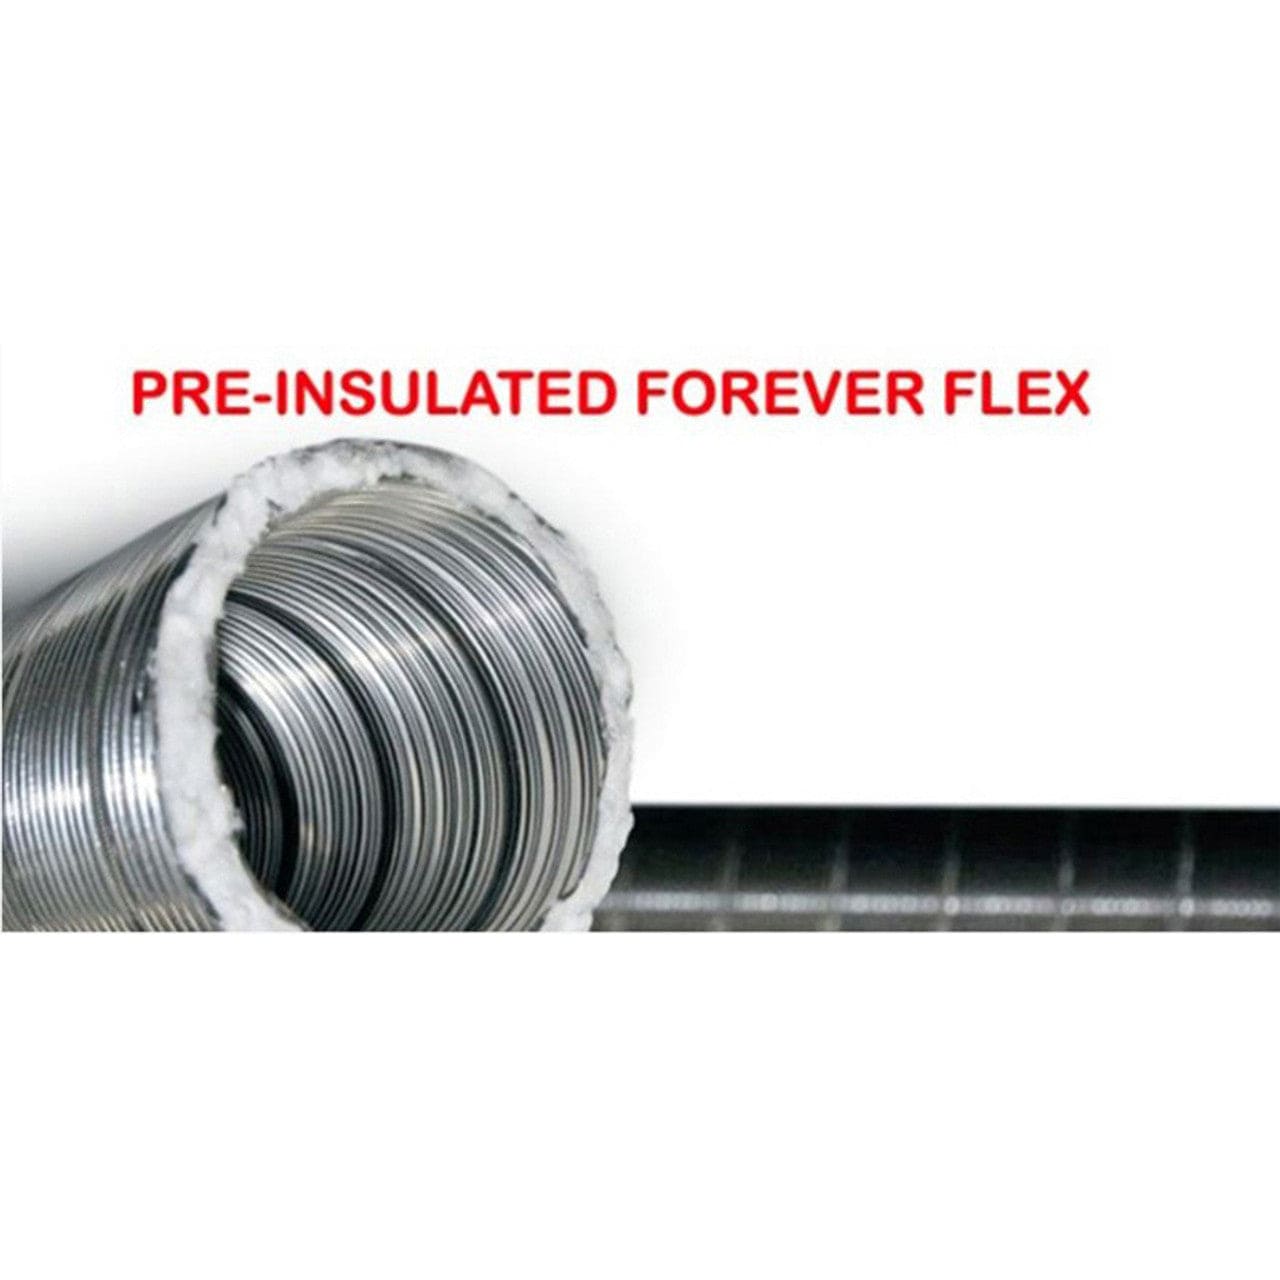 (DS) - 6" Premium Pre-Insulated Forever Flex 316Ti-Alloy .005 Stainless Cut-to-Length Liner - L5S6PI - Chimney Cricket